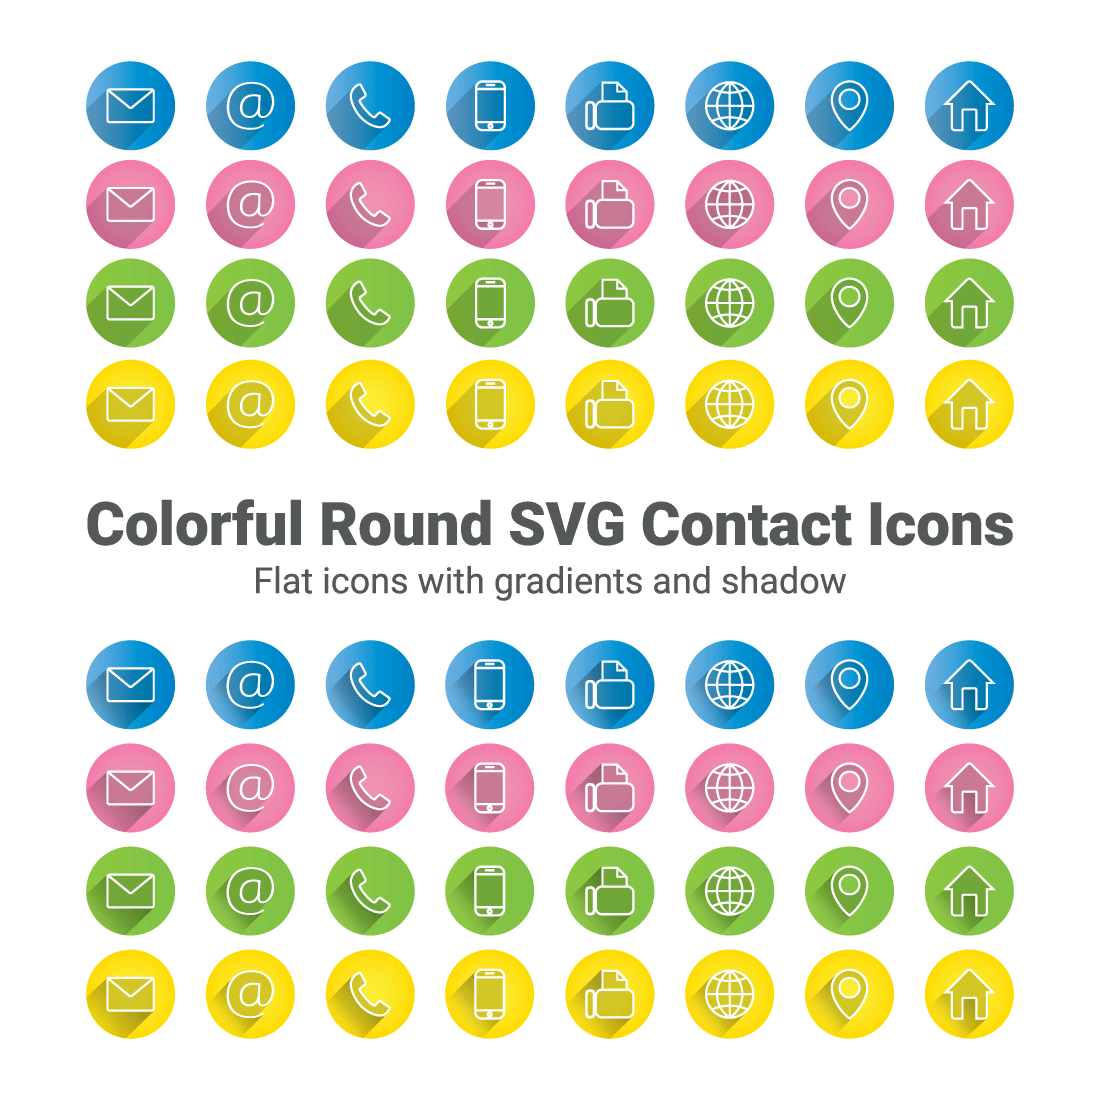 Colorful Round SVG Contact Icons cover image.